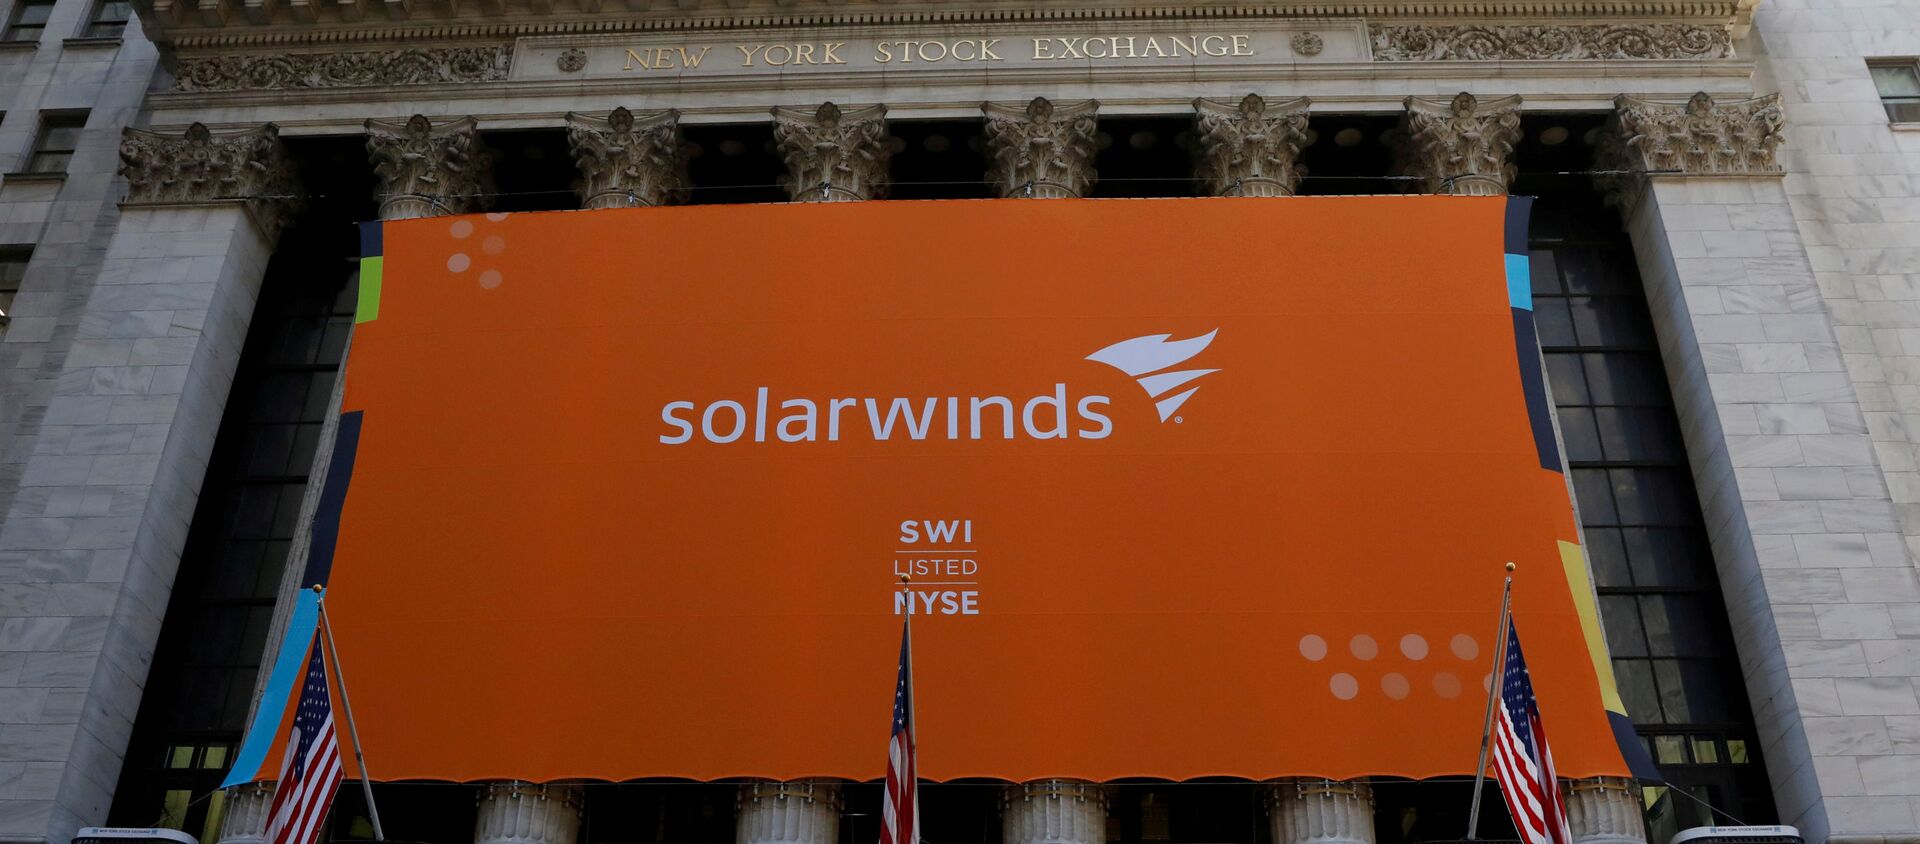 SolarWinds Corp banner hangs at the New York Stock Exchange (NYSE) on the IPO day of the company in New York, U.S., October 19, 2018 - Sputnik International, 1920, 19.01.2021